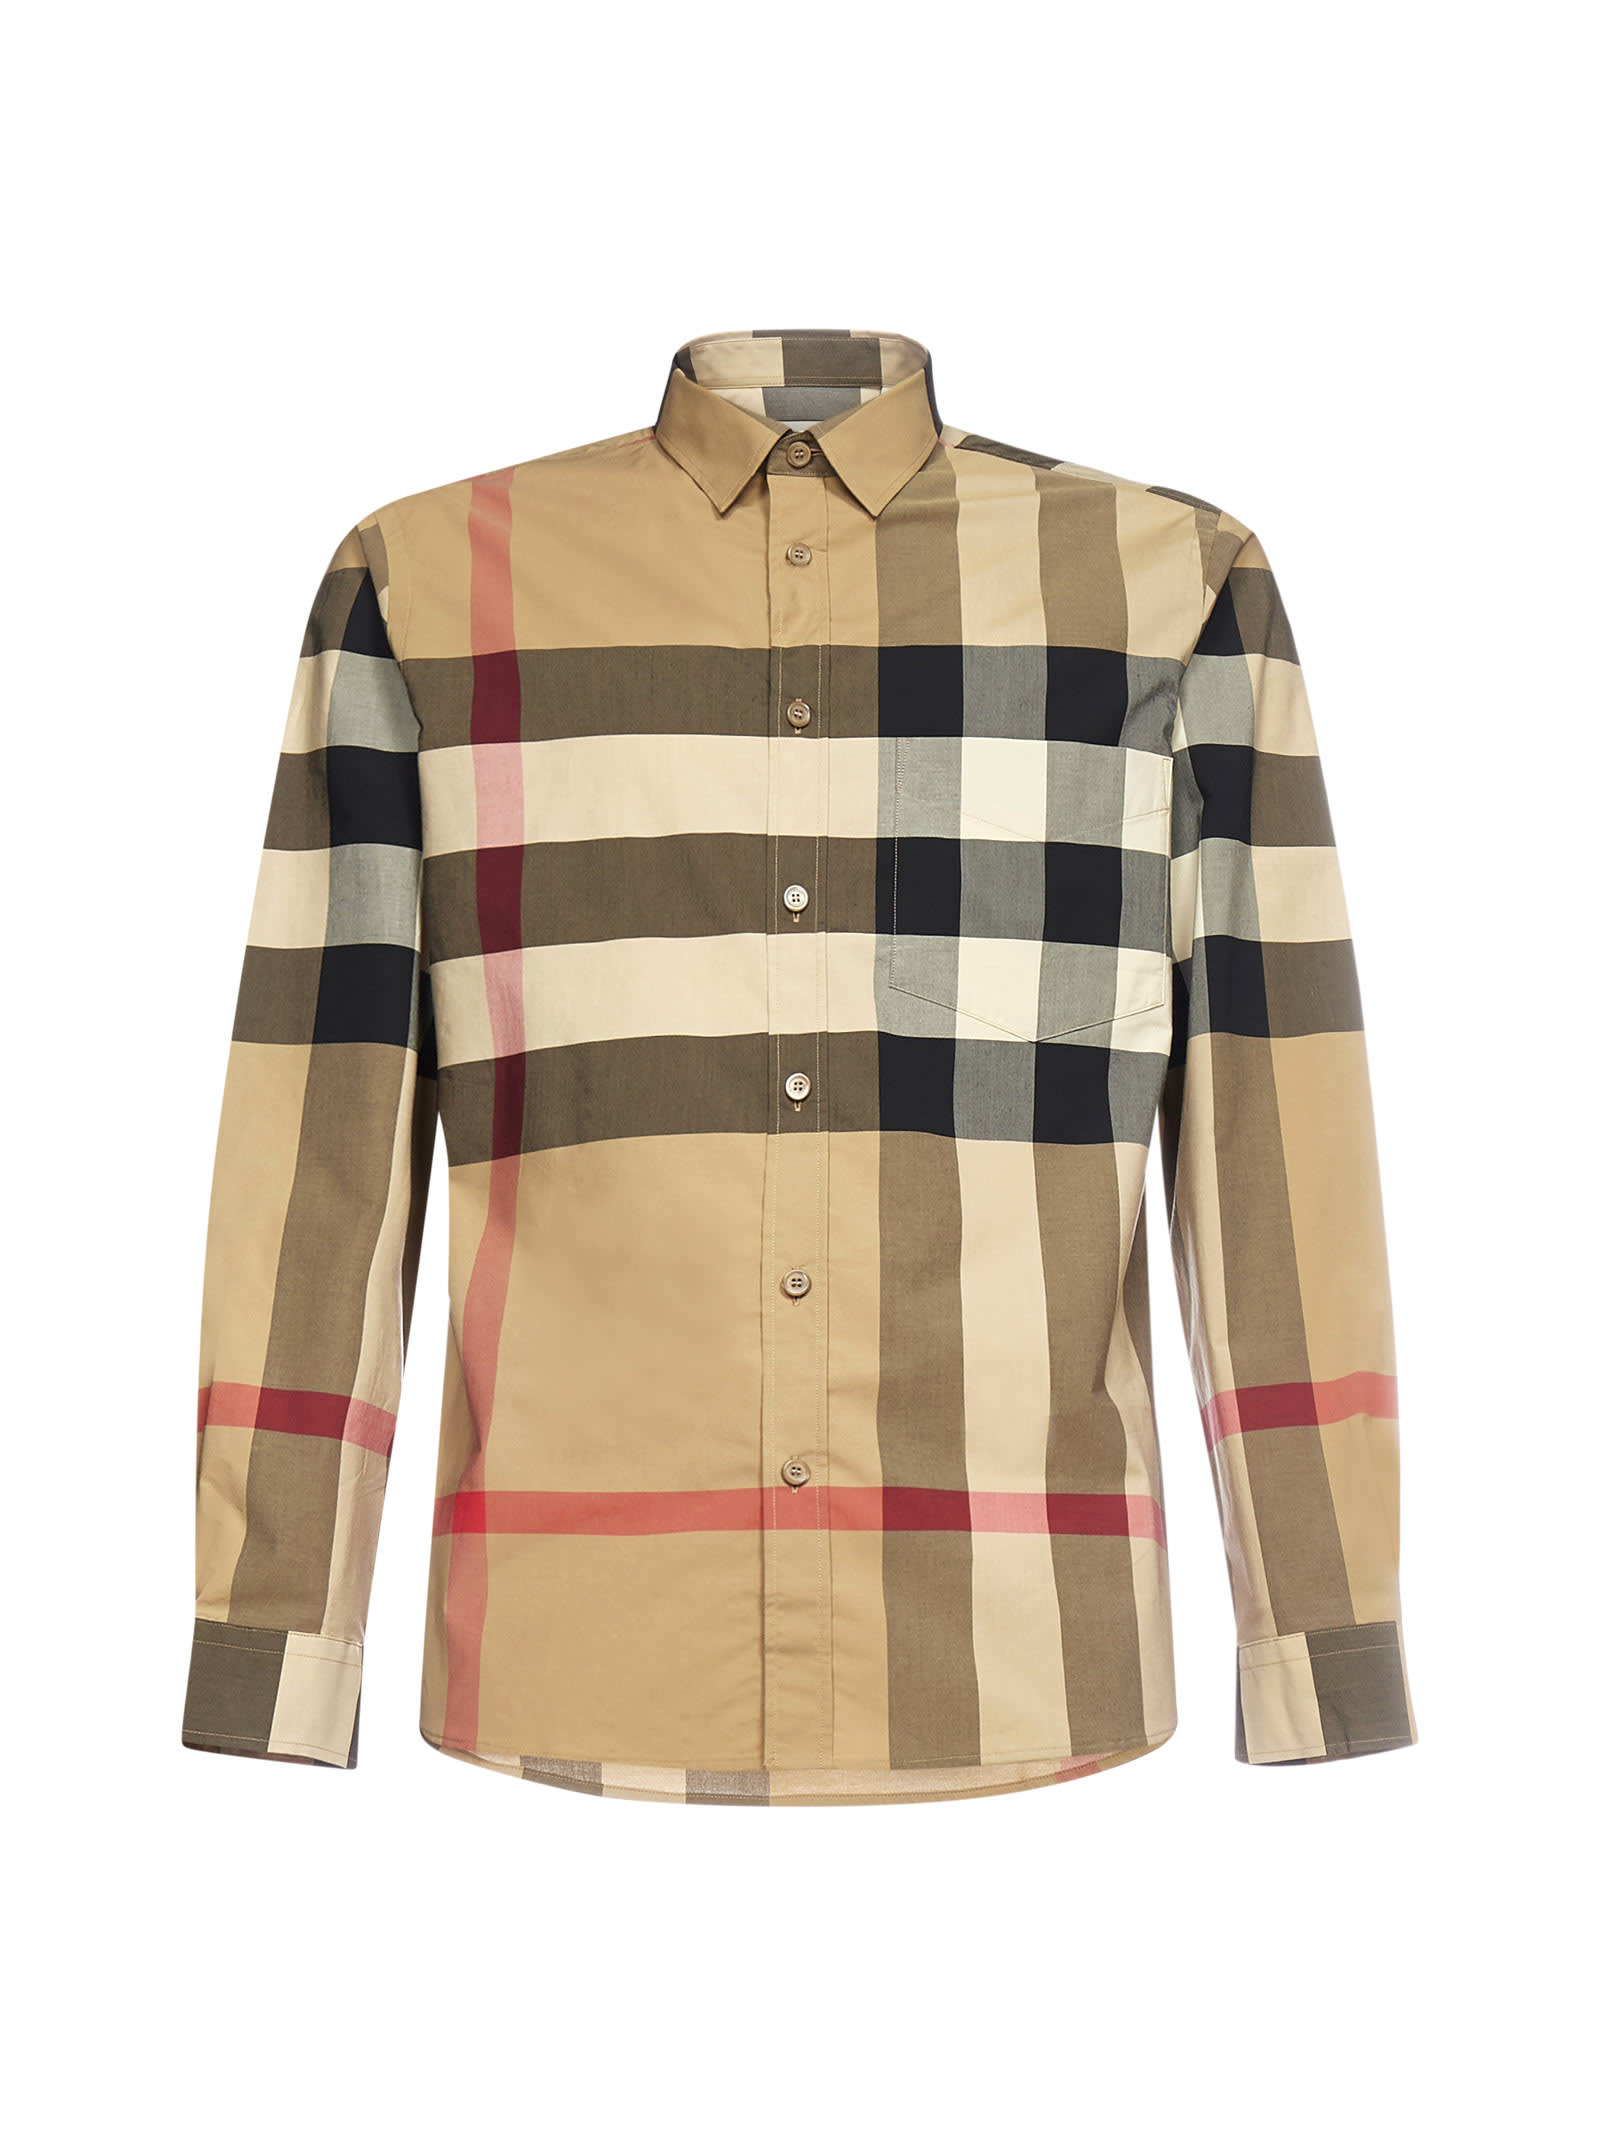 Burberry Shirt In Archive Beige Ip Chk | ModeSens